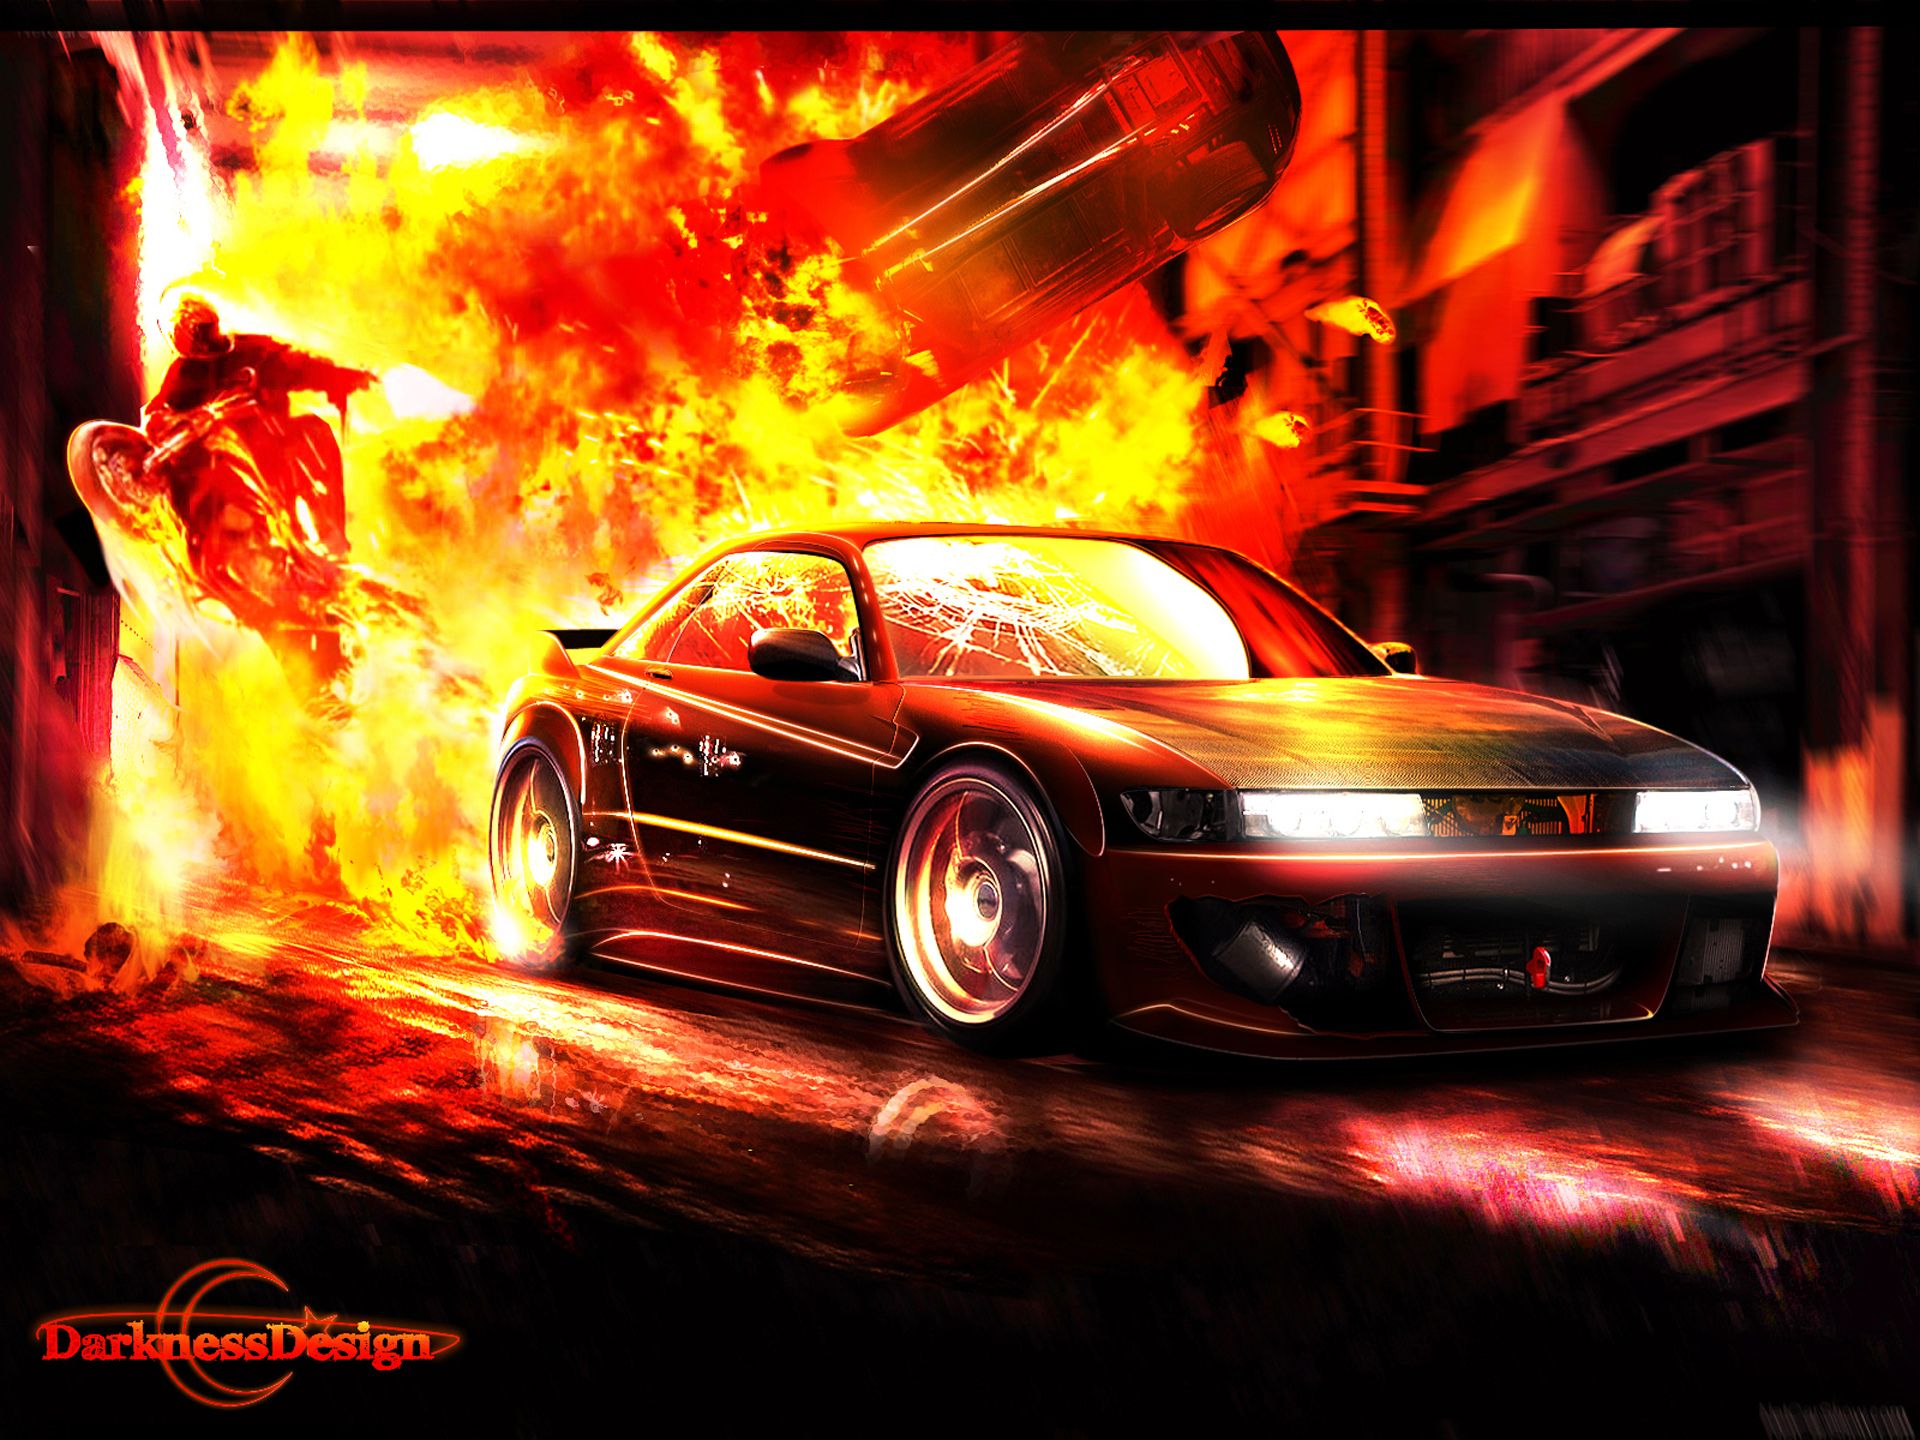 The Car Goes Out Of The Fire Wallpaper And Image Fire Background Hd, Download Wallpaper